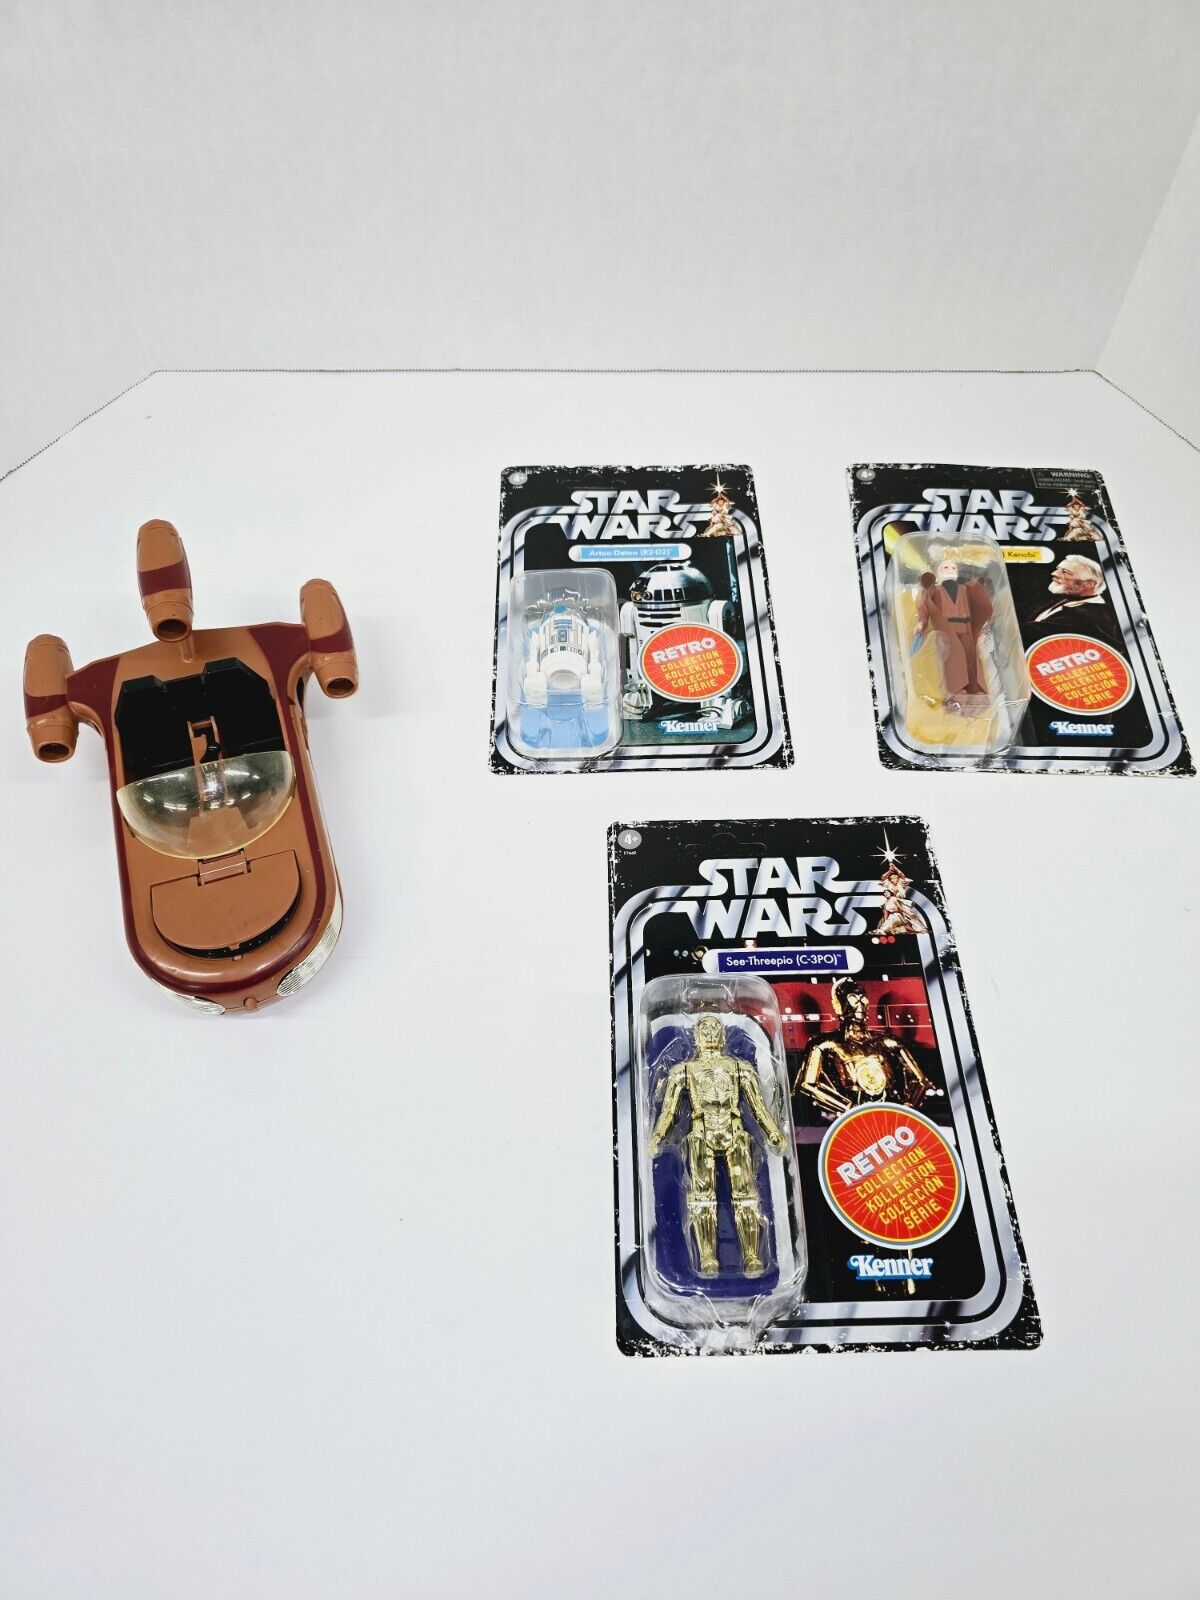 Star Wars The Retro Collection R2-D2, C-3PO, OBI-WAN KENOBI SEALED NEW UNPUNCHED